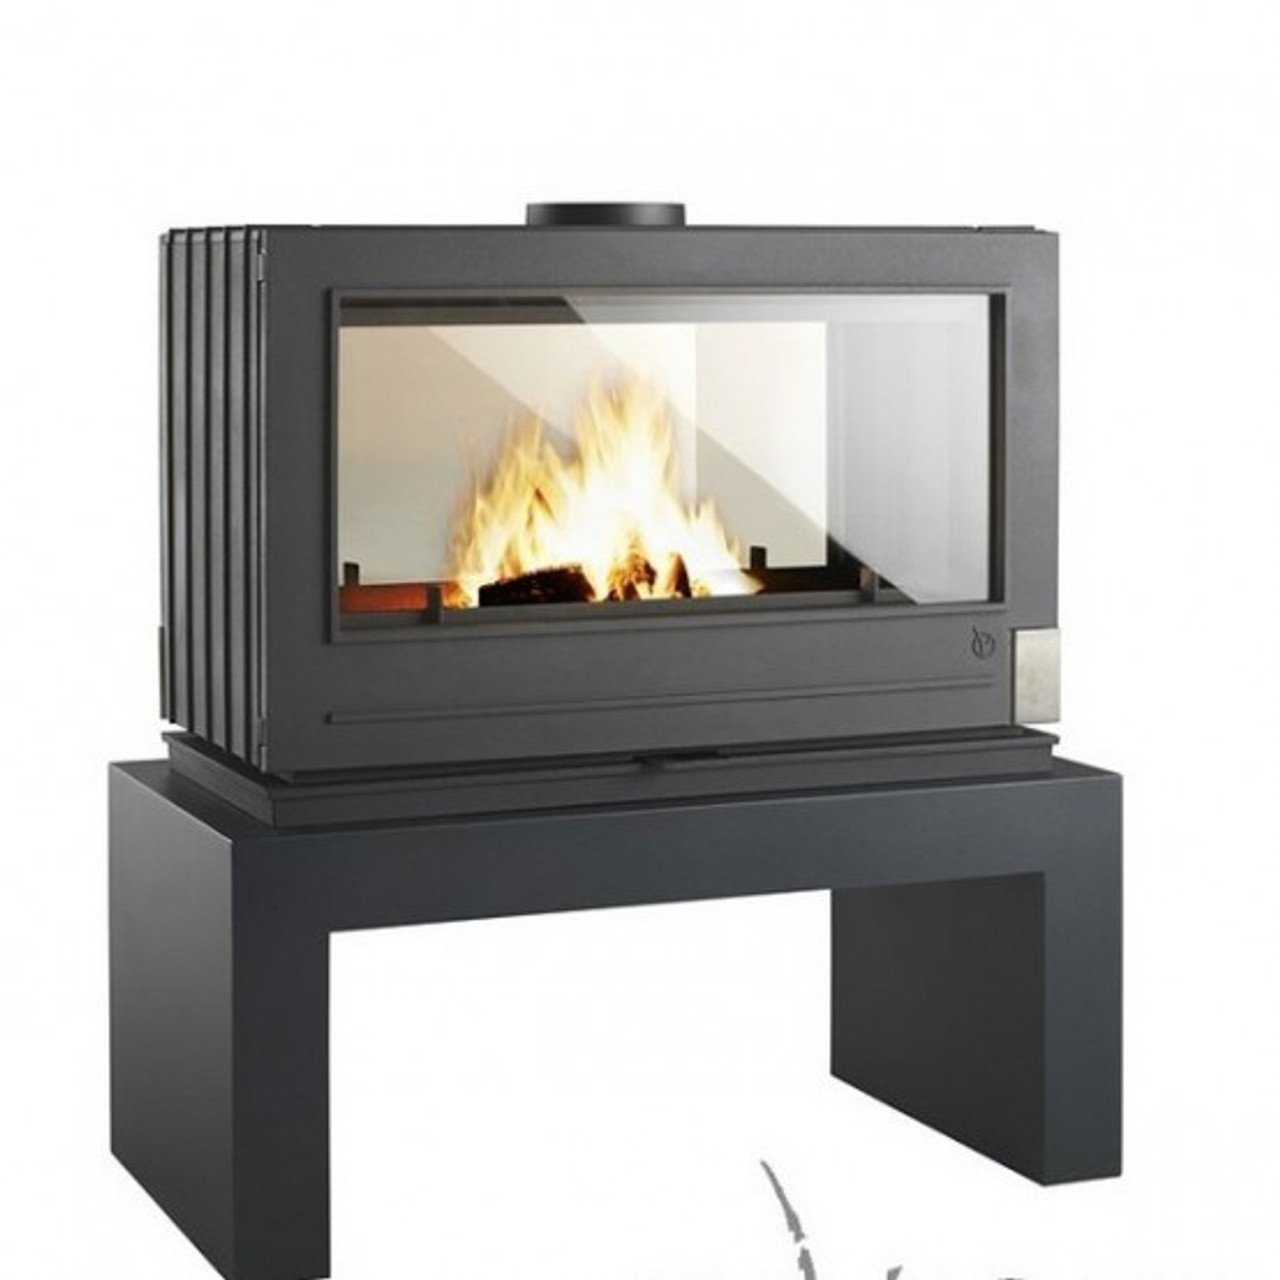 Invicta ron Double Sided Wood Stove